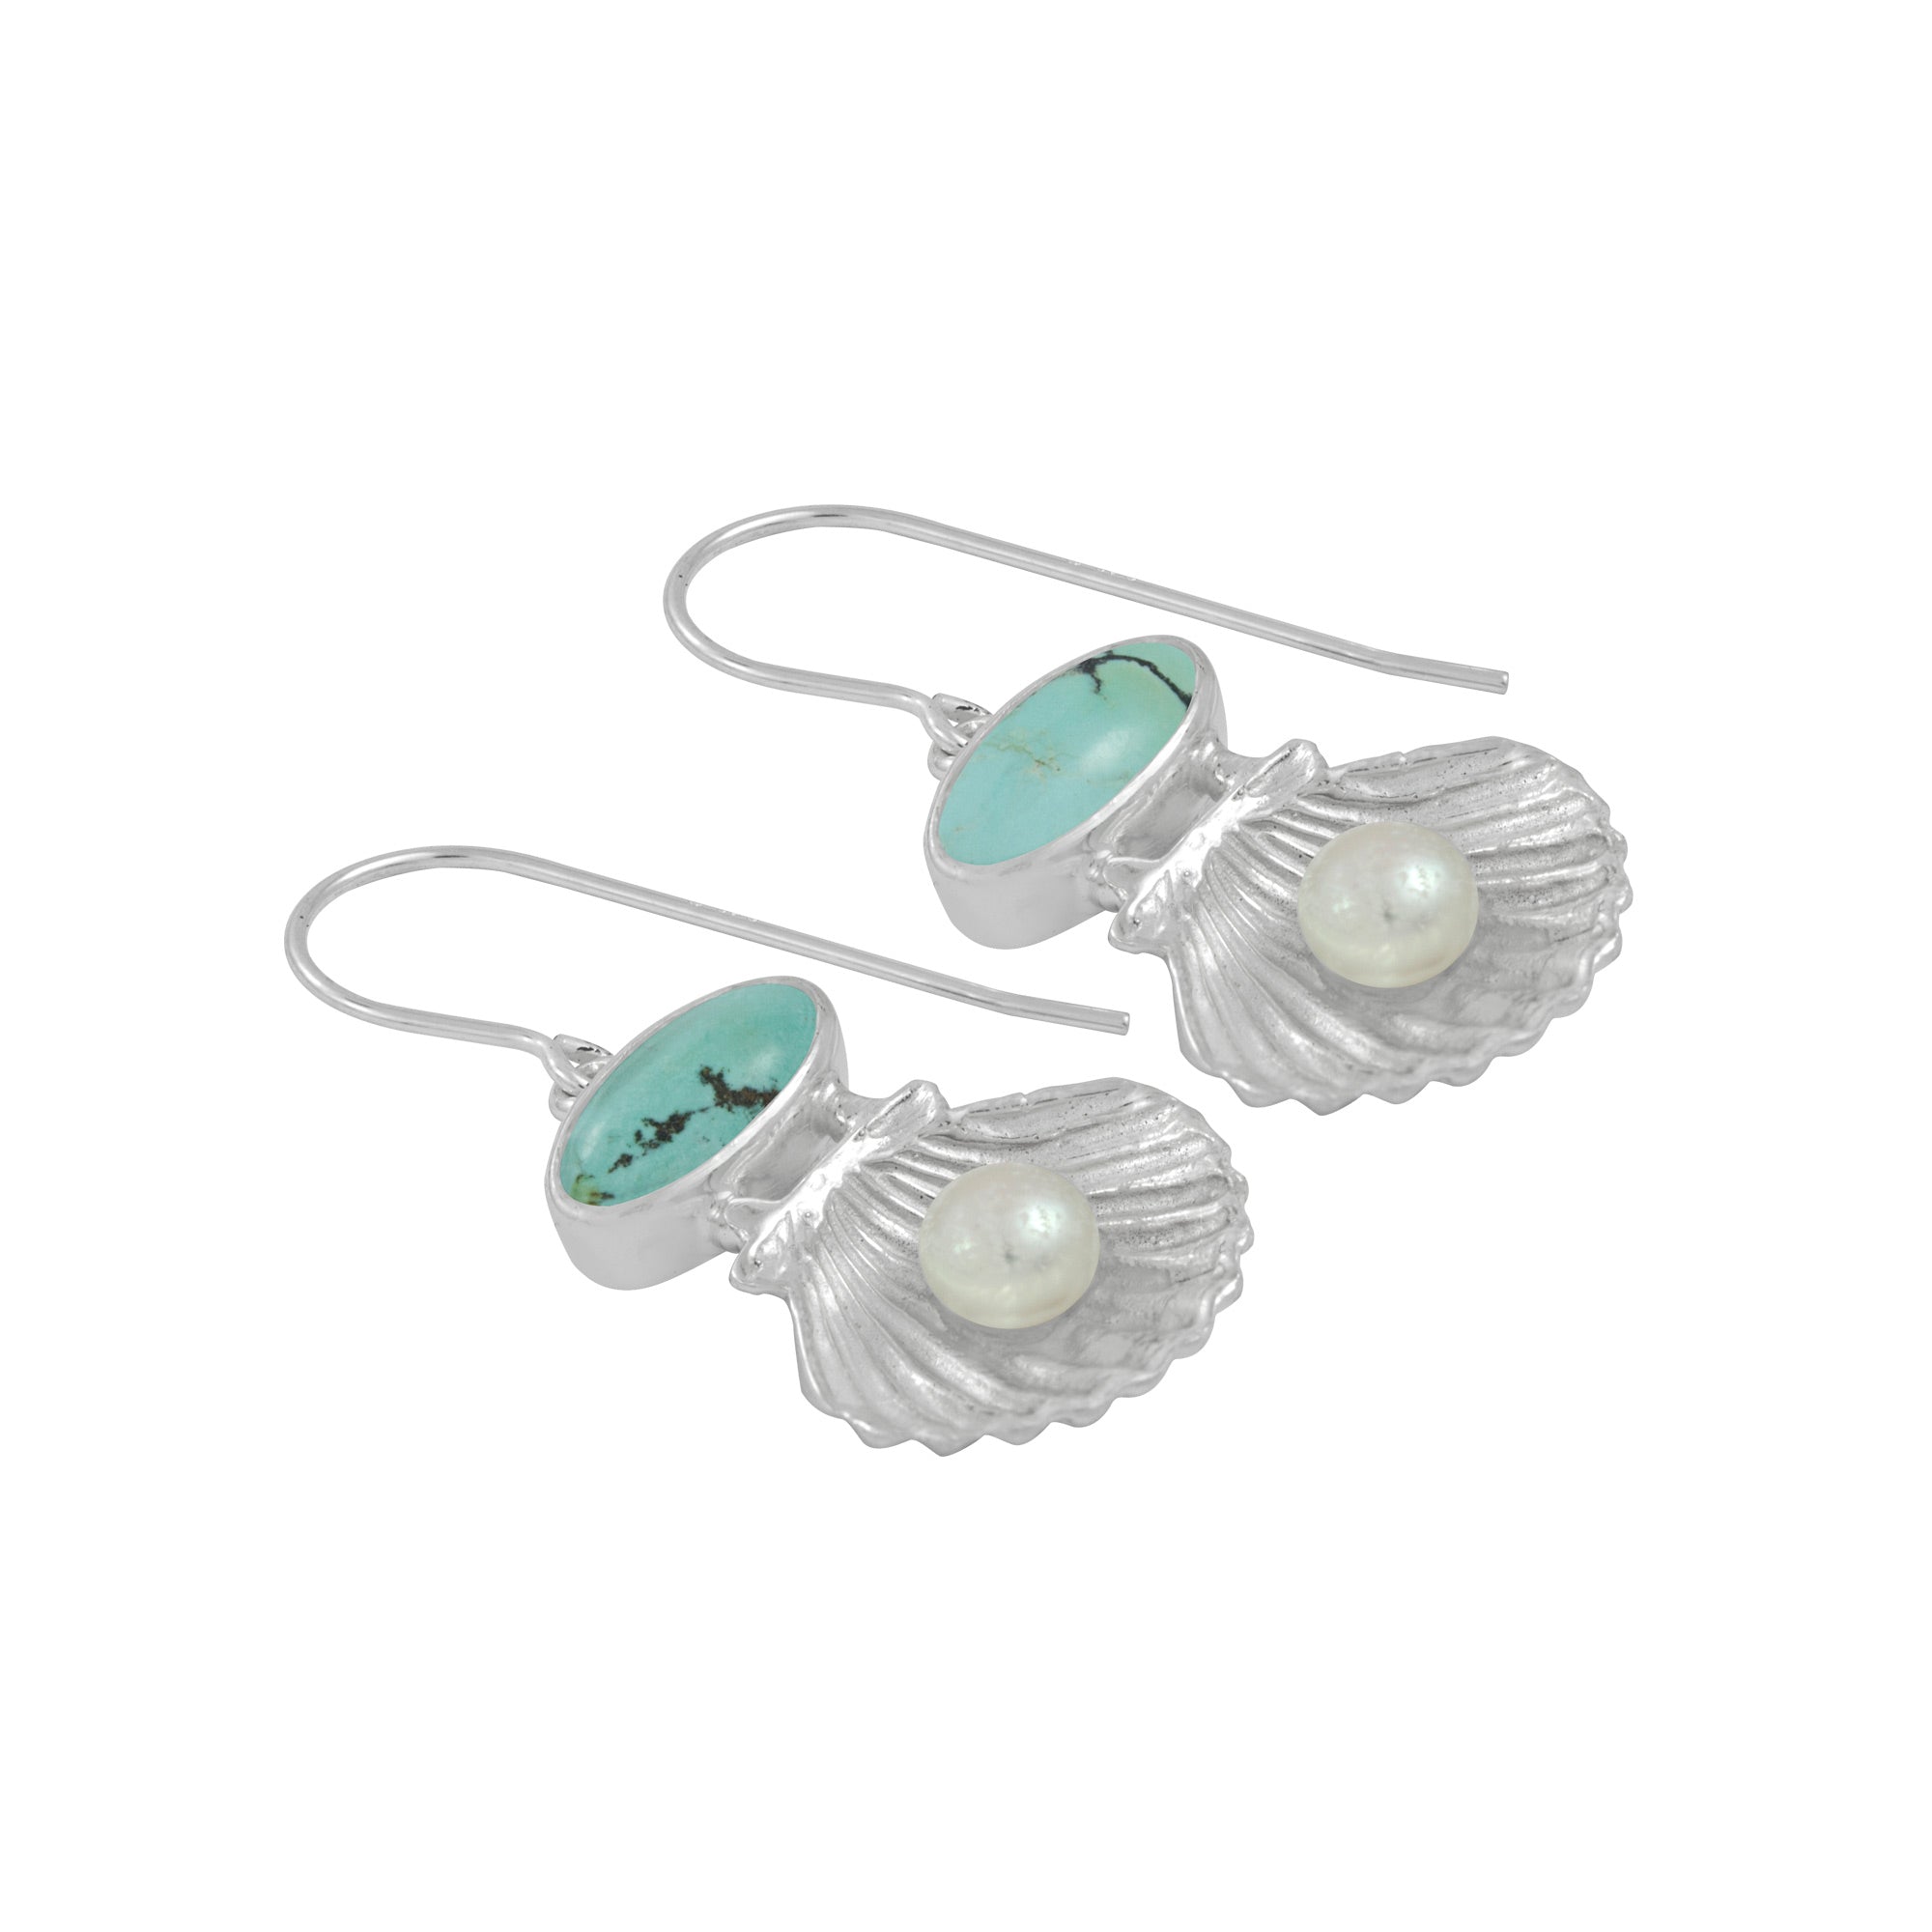 Turqoise and Silver Shell Earring